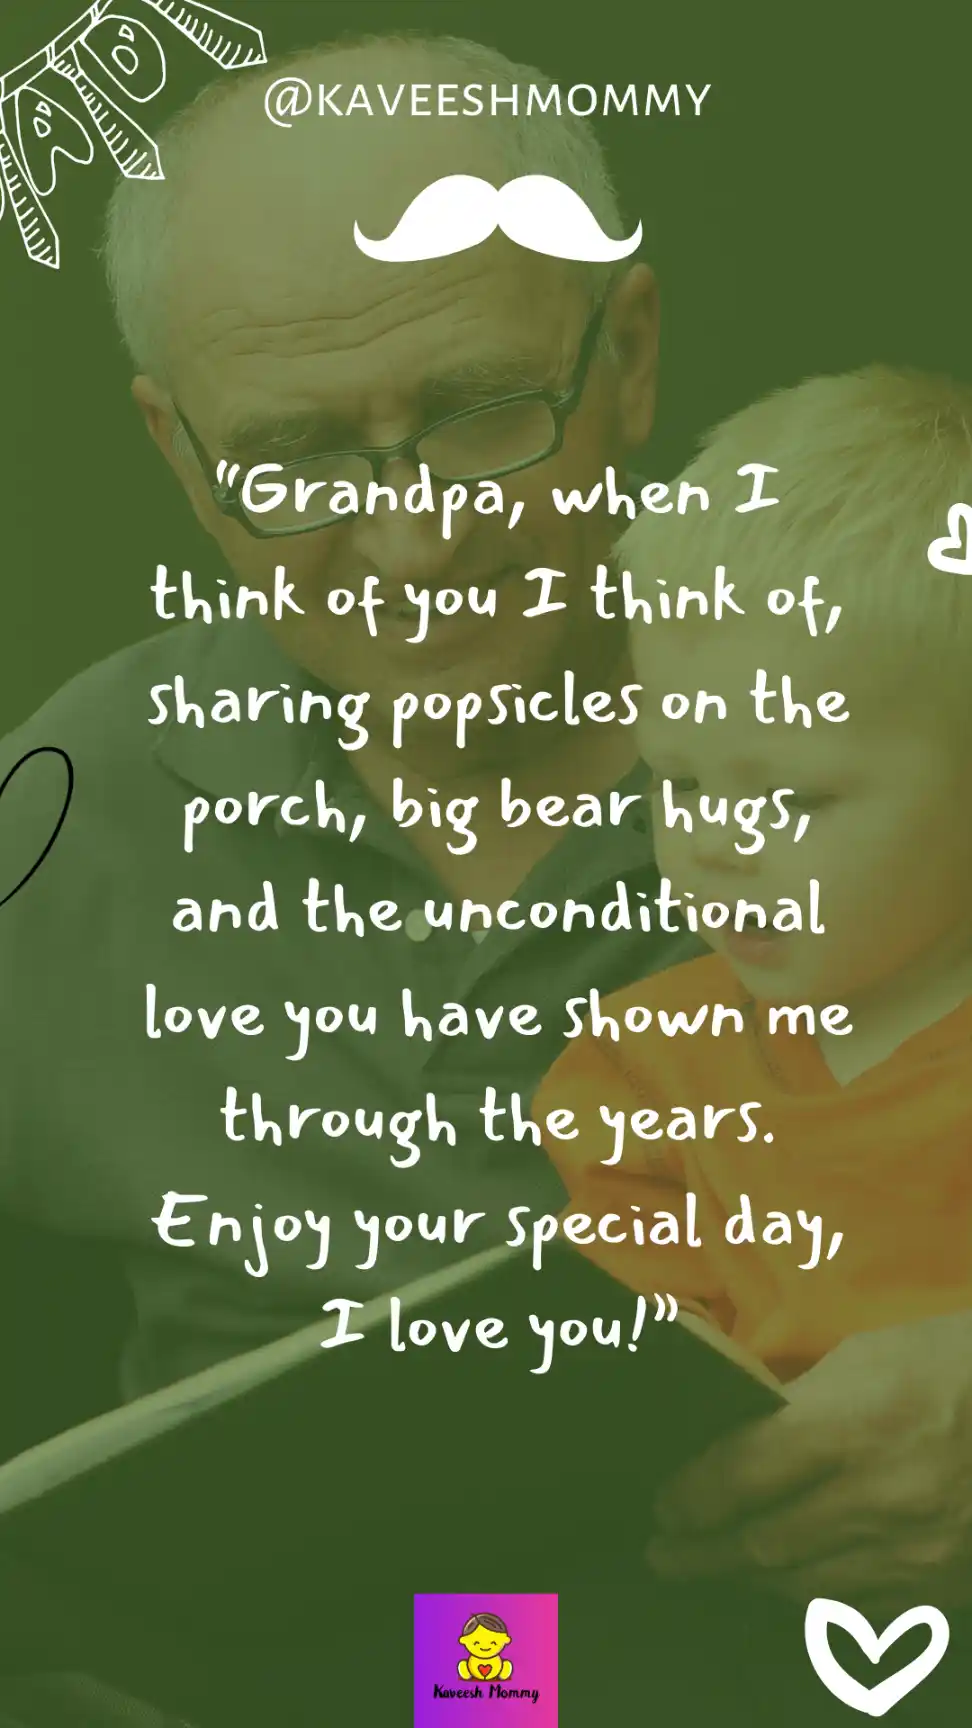 fathers day message grandad-KAVEESH MOMMY 